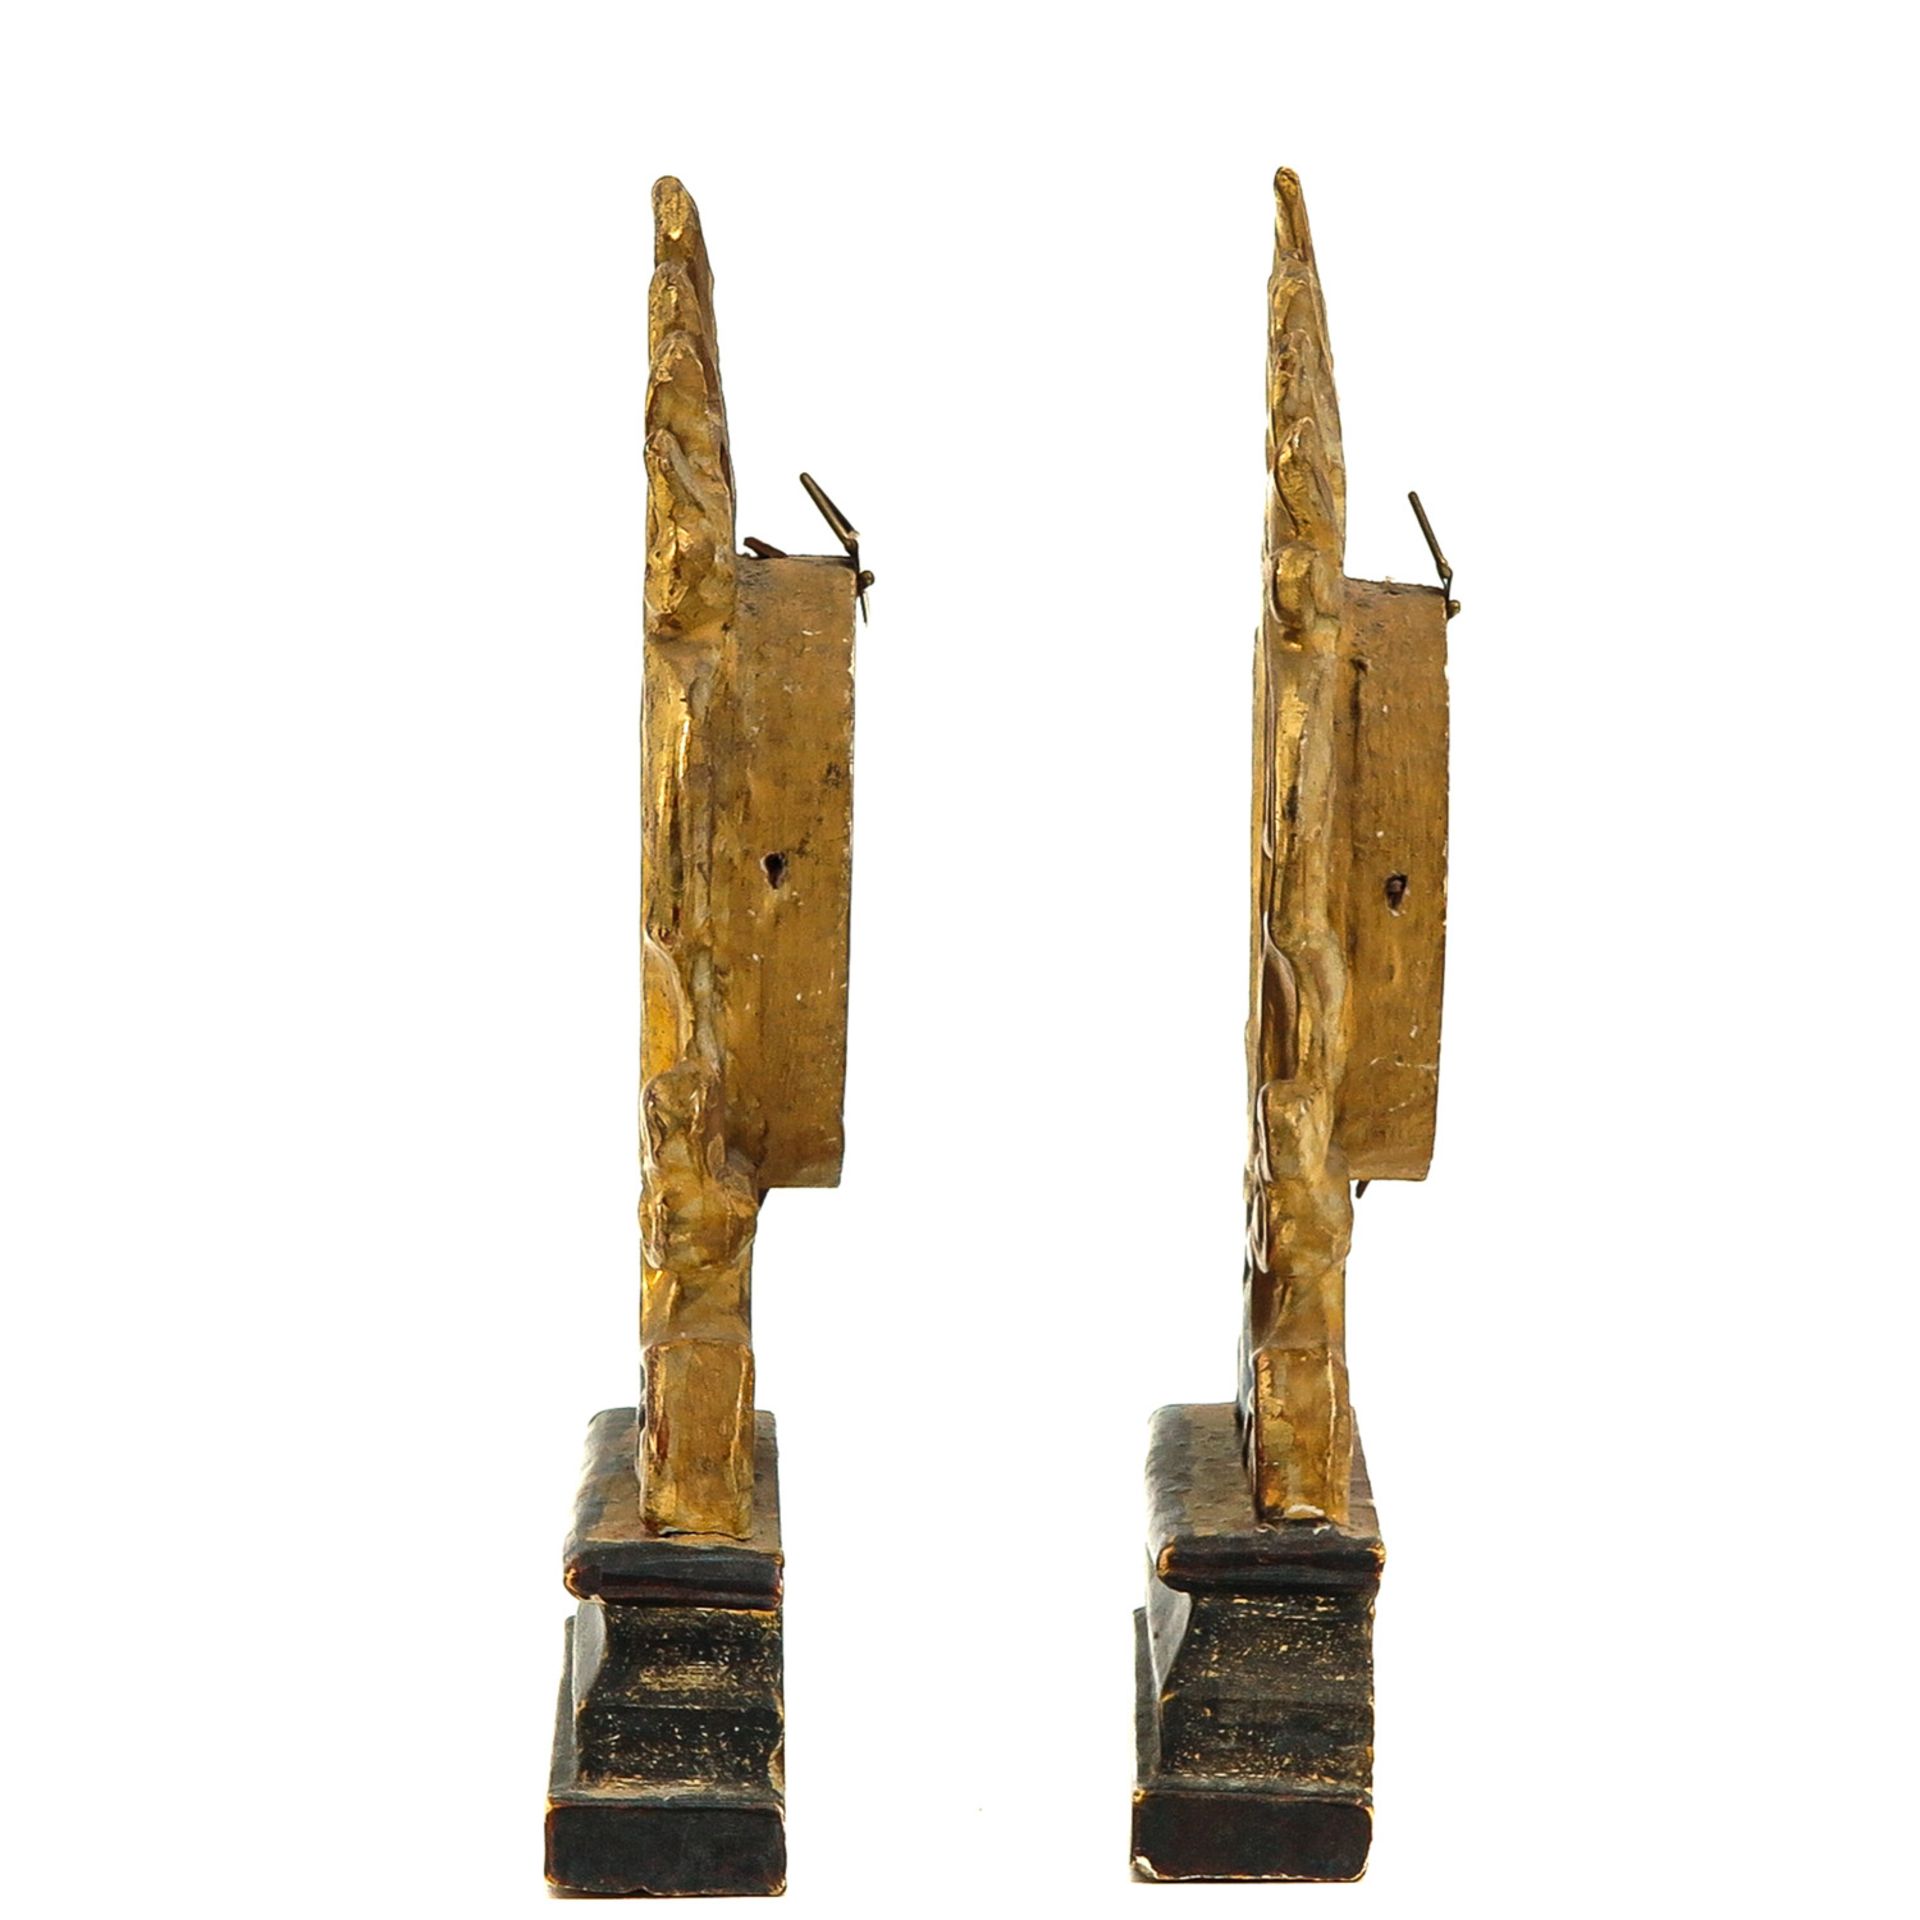 A Pair of Relic Holders Each Holding 5 Relics - Image 2 of 7